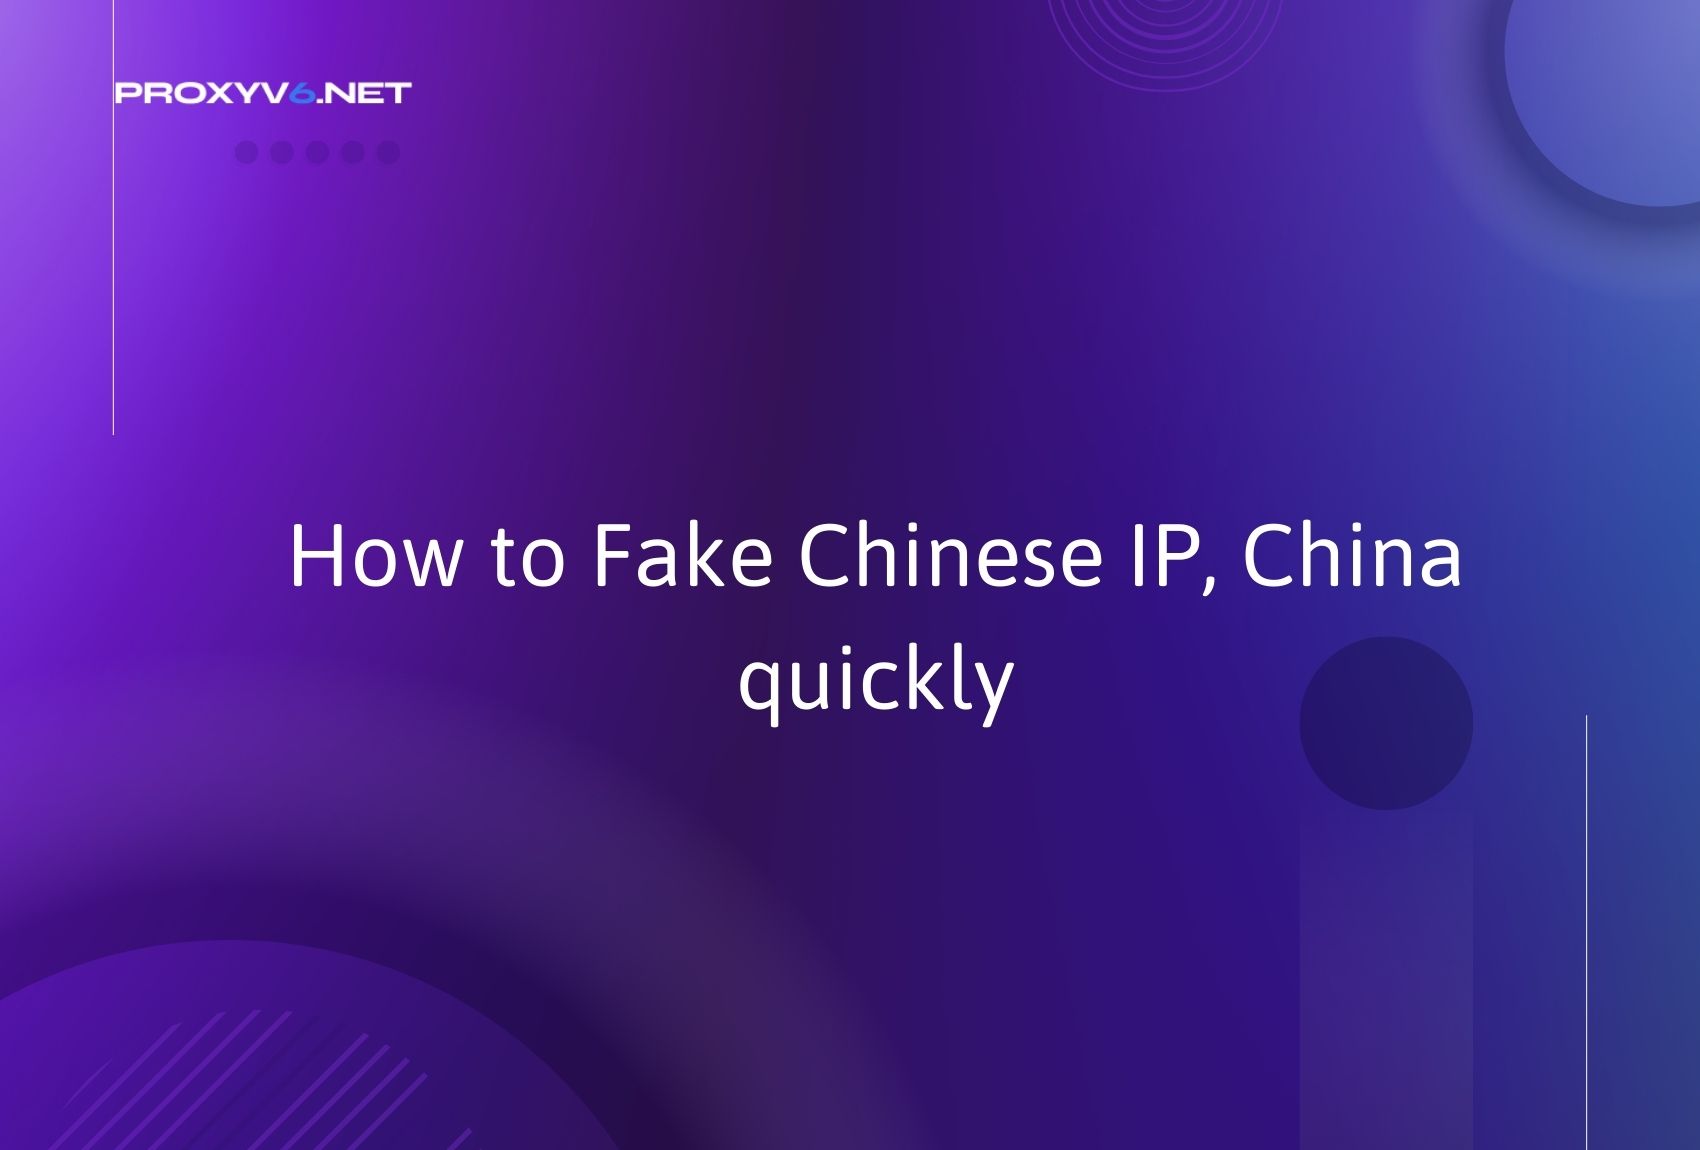 How to Fake Chinese IP, China quickly